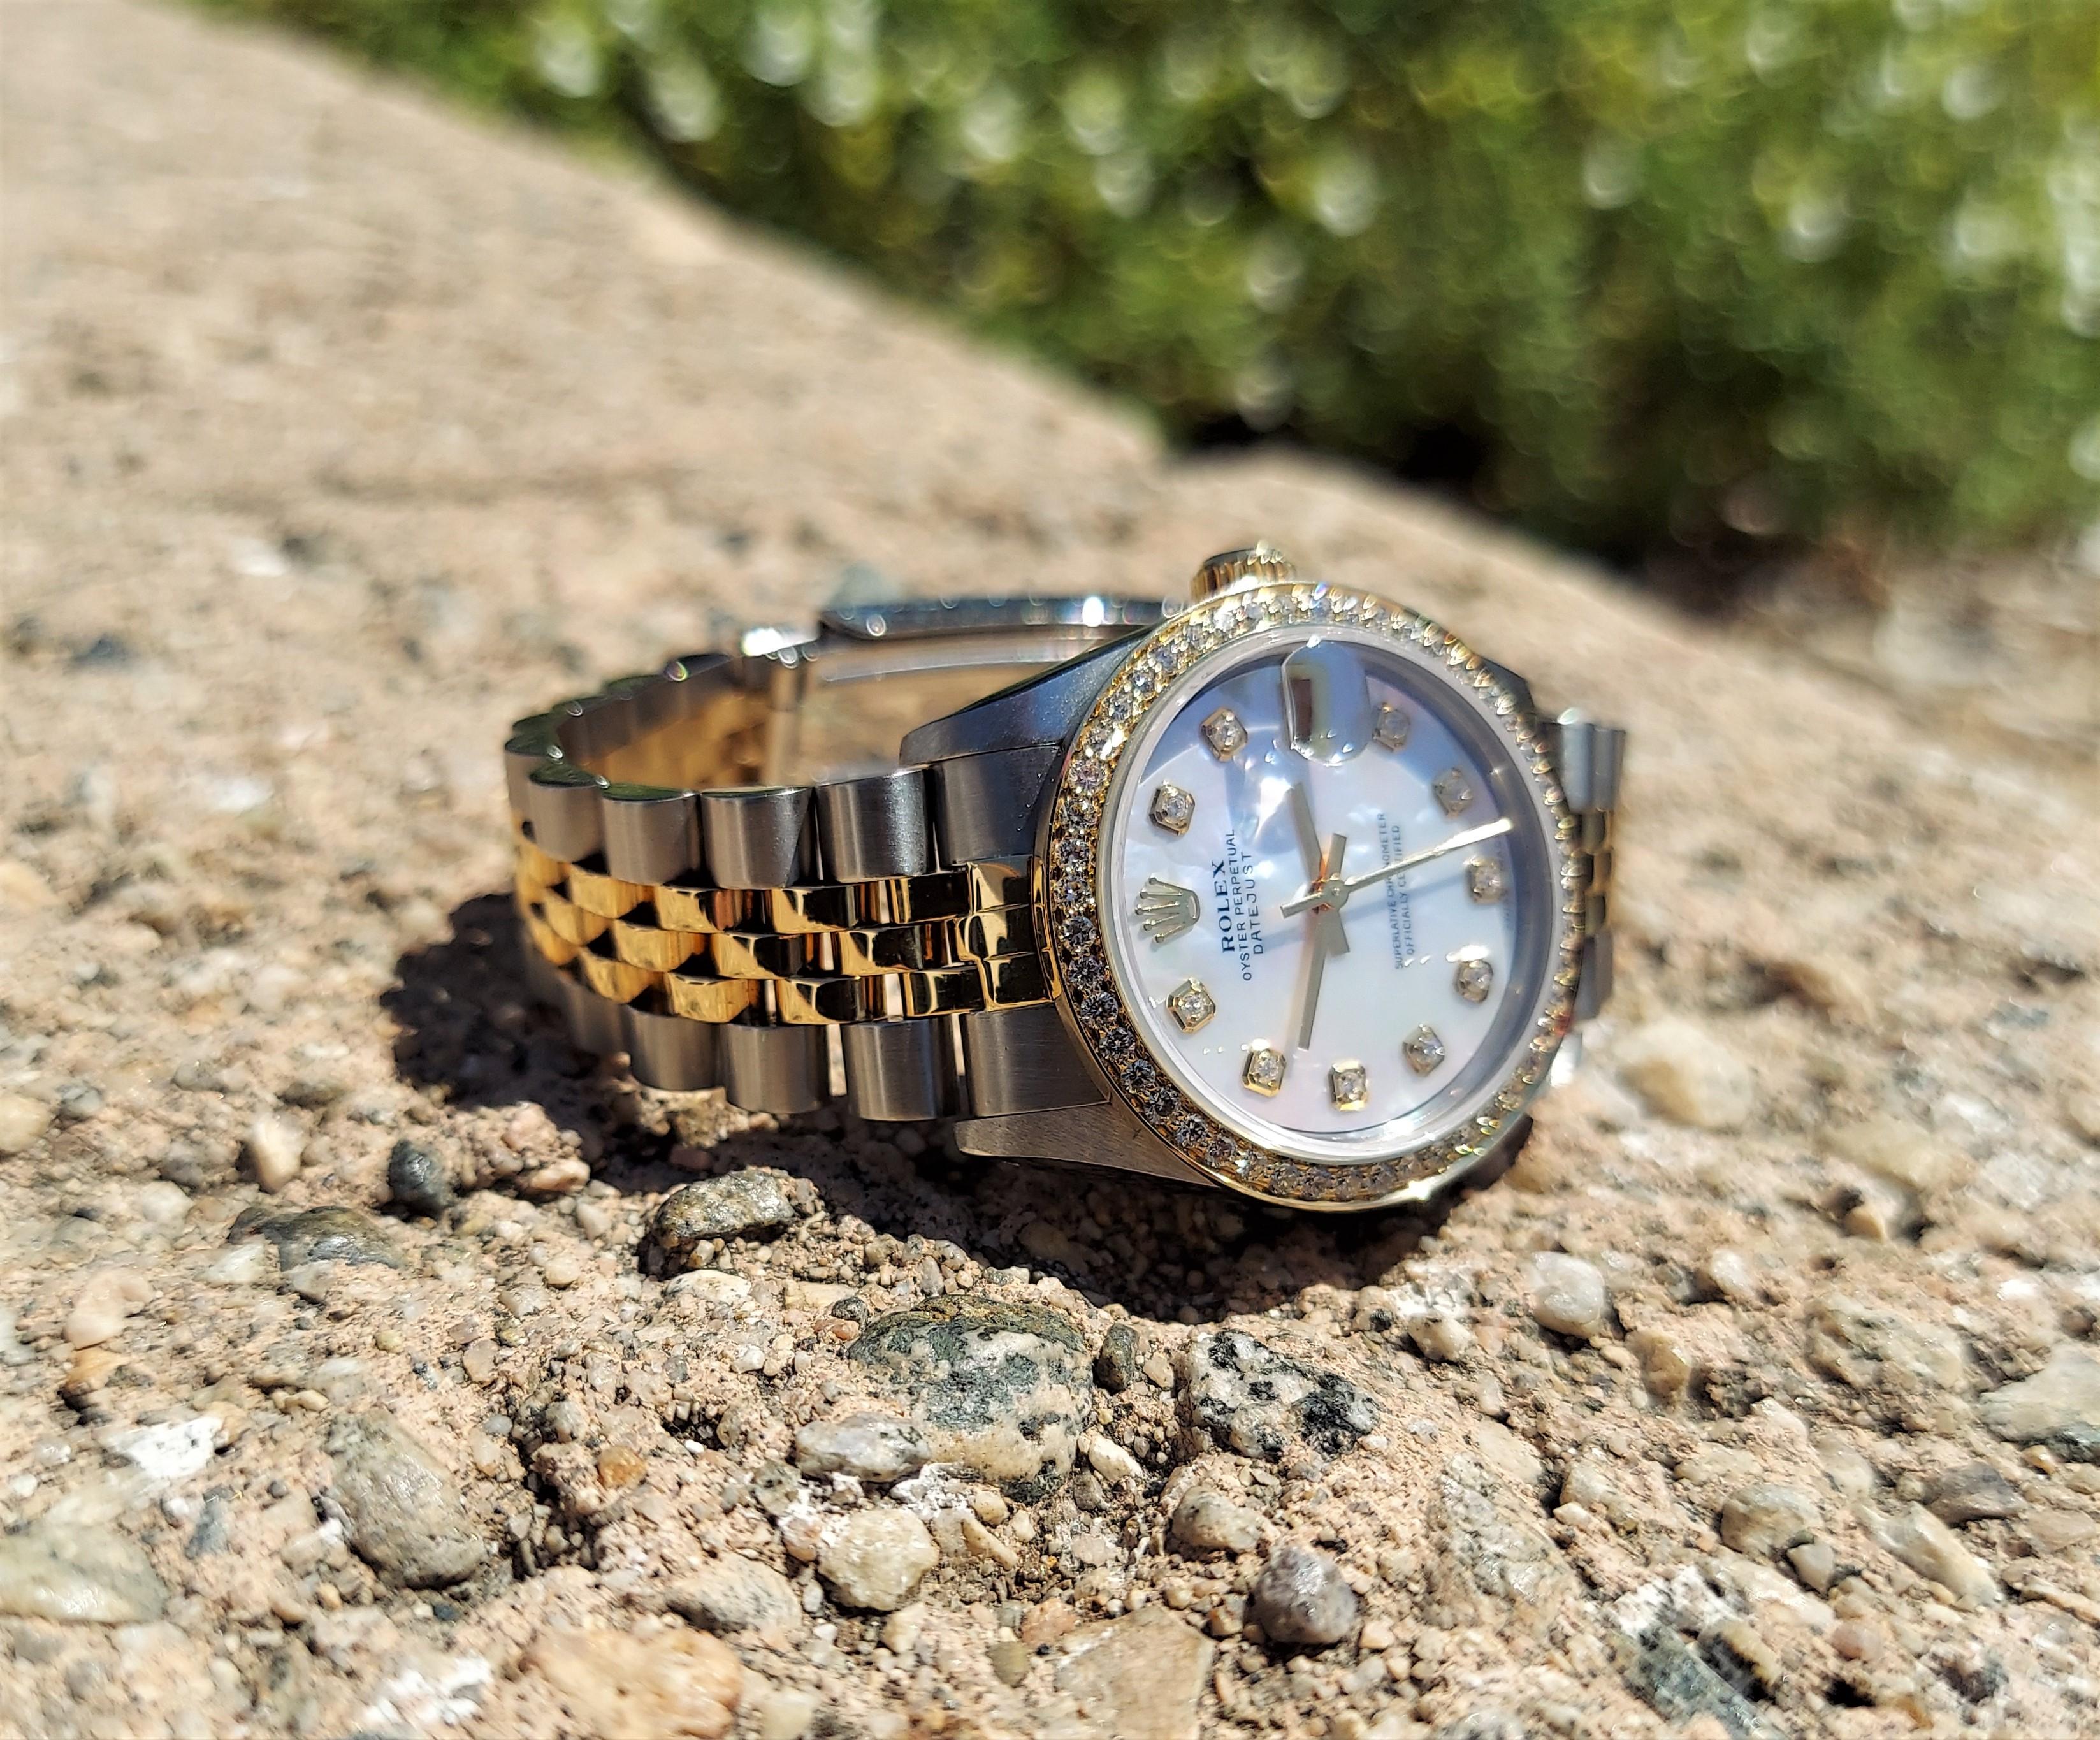 Brand - Rolex
Model - 68273 Datejust 
Metals - Yellow Gold/Steel
Case Size - 31mm
Crystal - Sapphire
Dial - MOP Diamond 
Movement - Automatic CAL.2135
Wrist size - Two tone Jubilee
Wrist Size - 7 inches 

3 Year In House warranty
Watch Appraisal